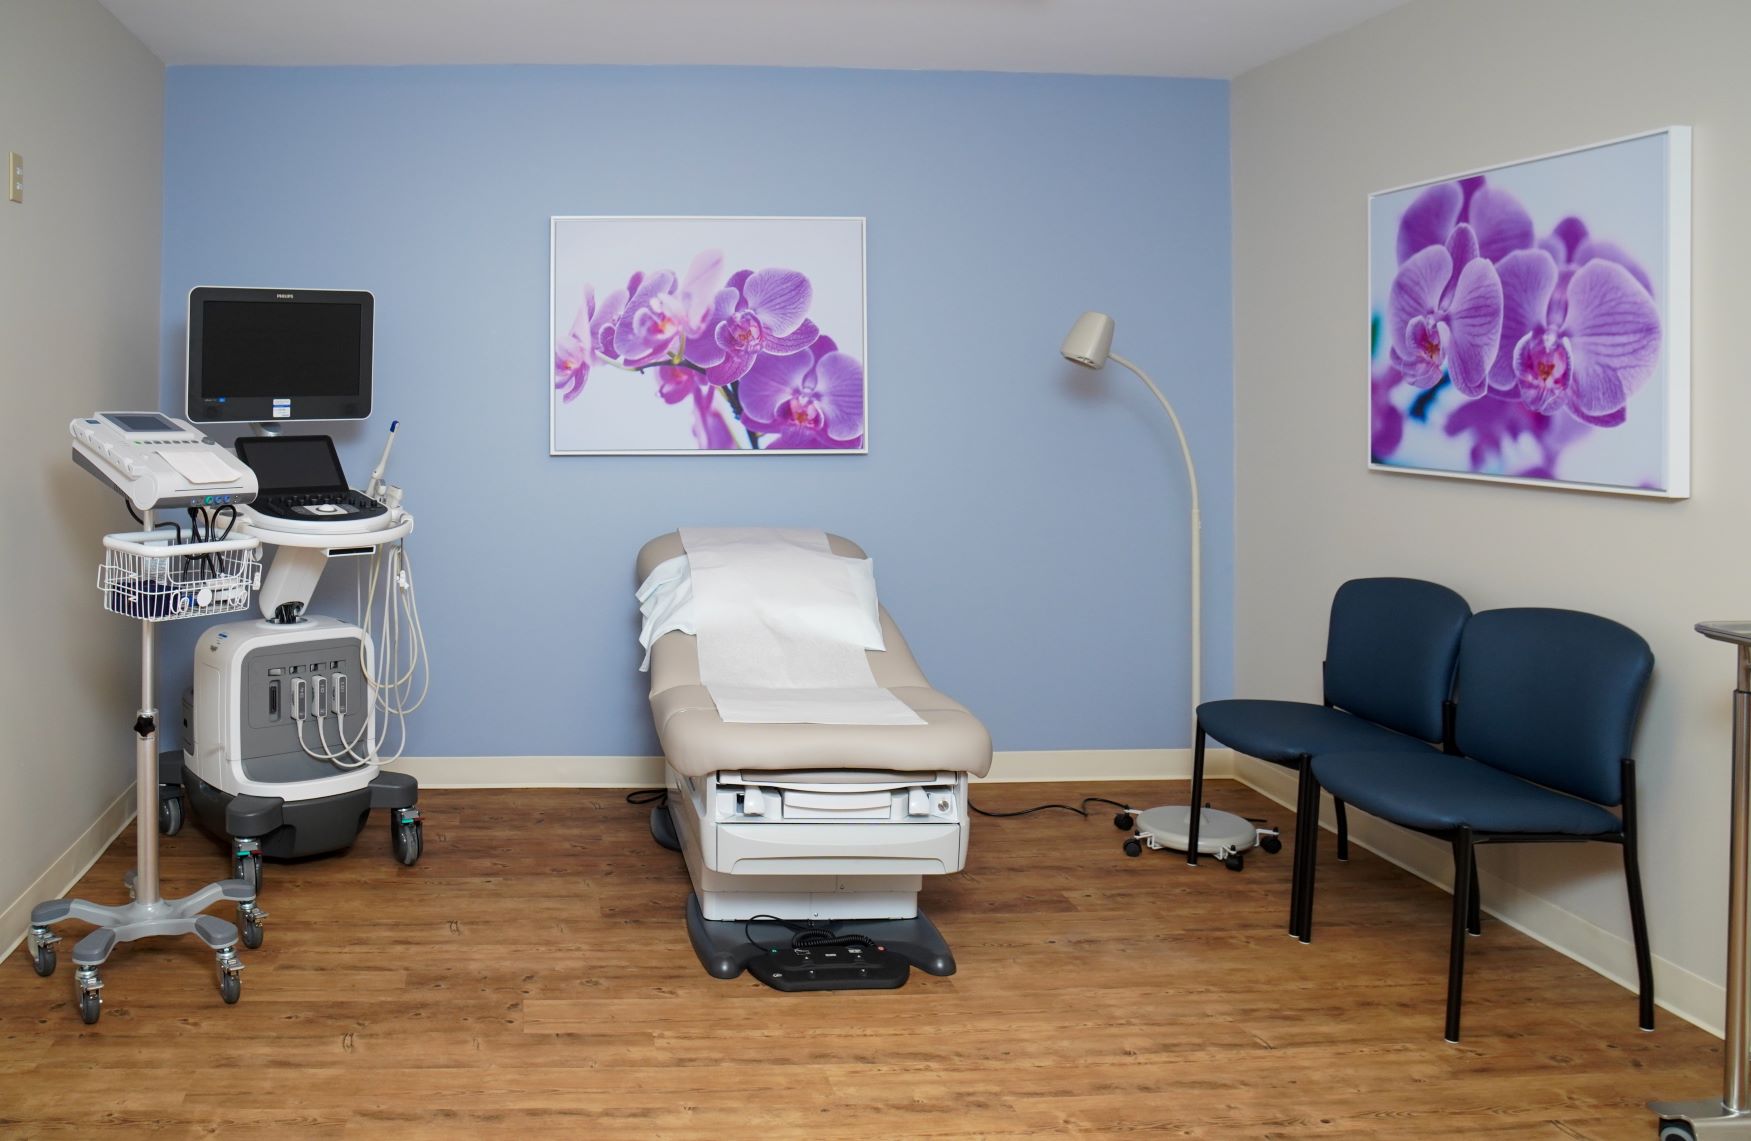 OBGYN East Vineland Patient Examination Room